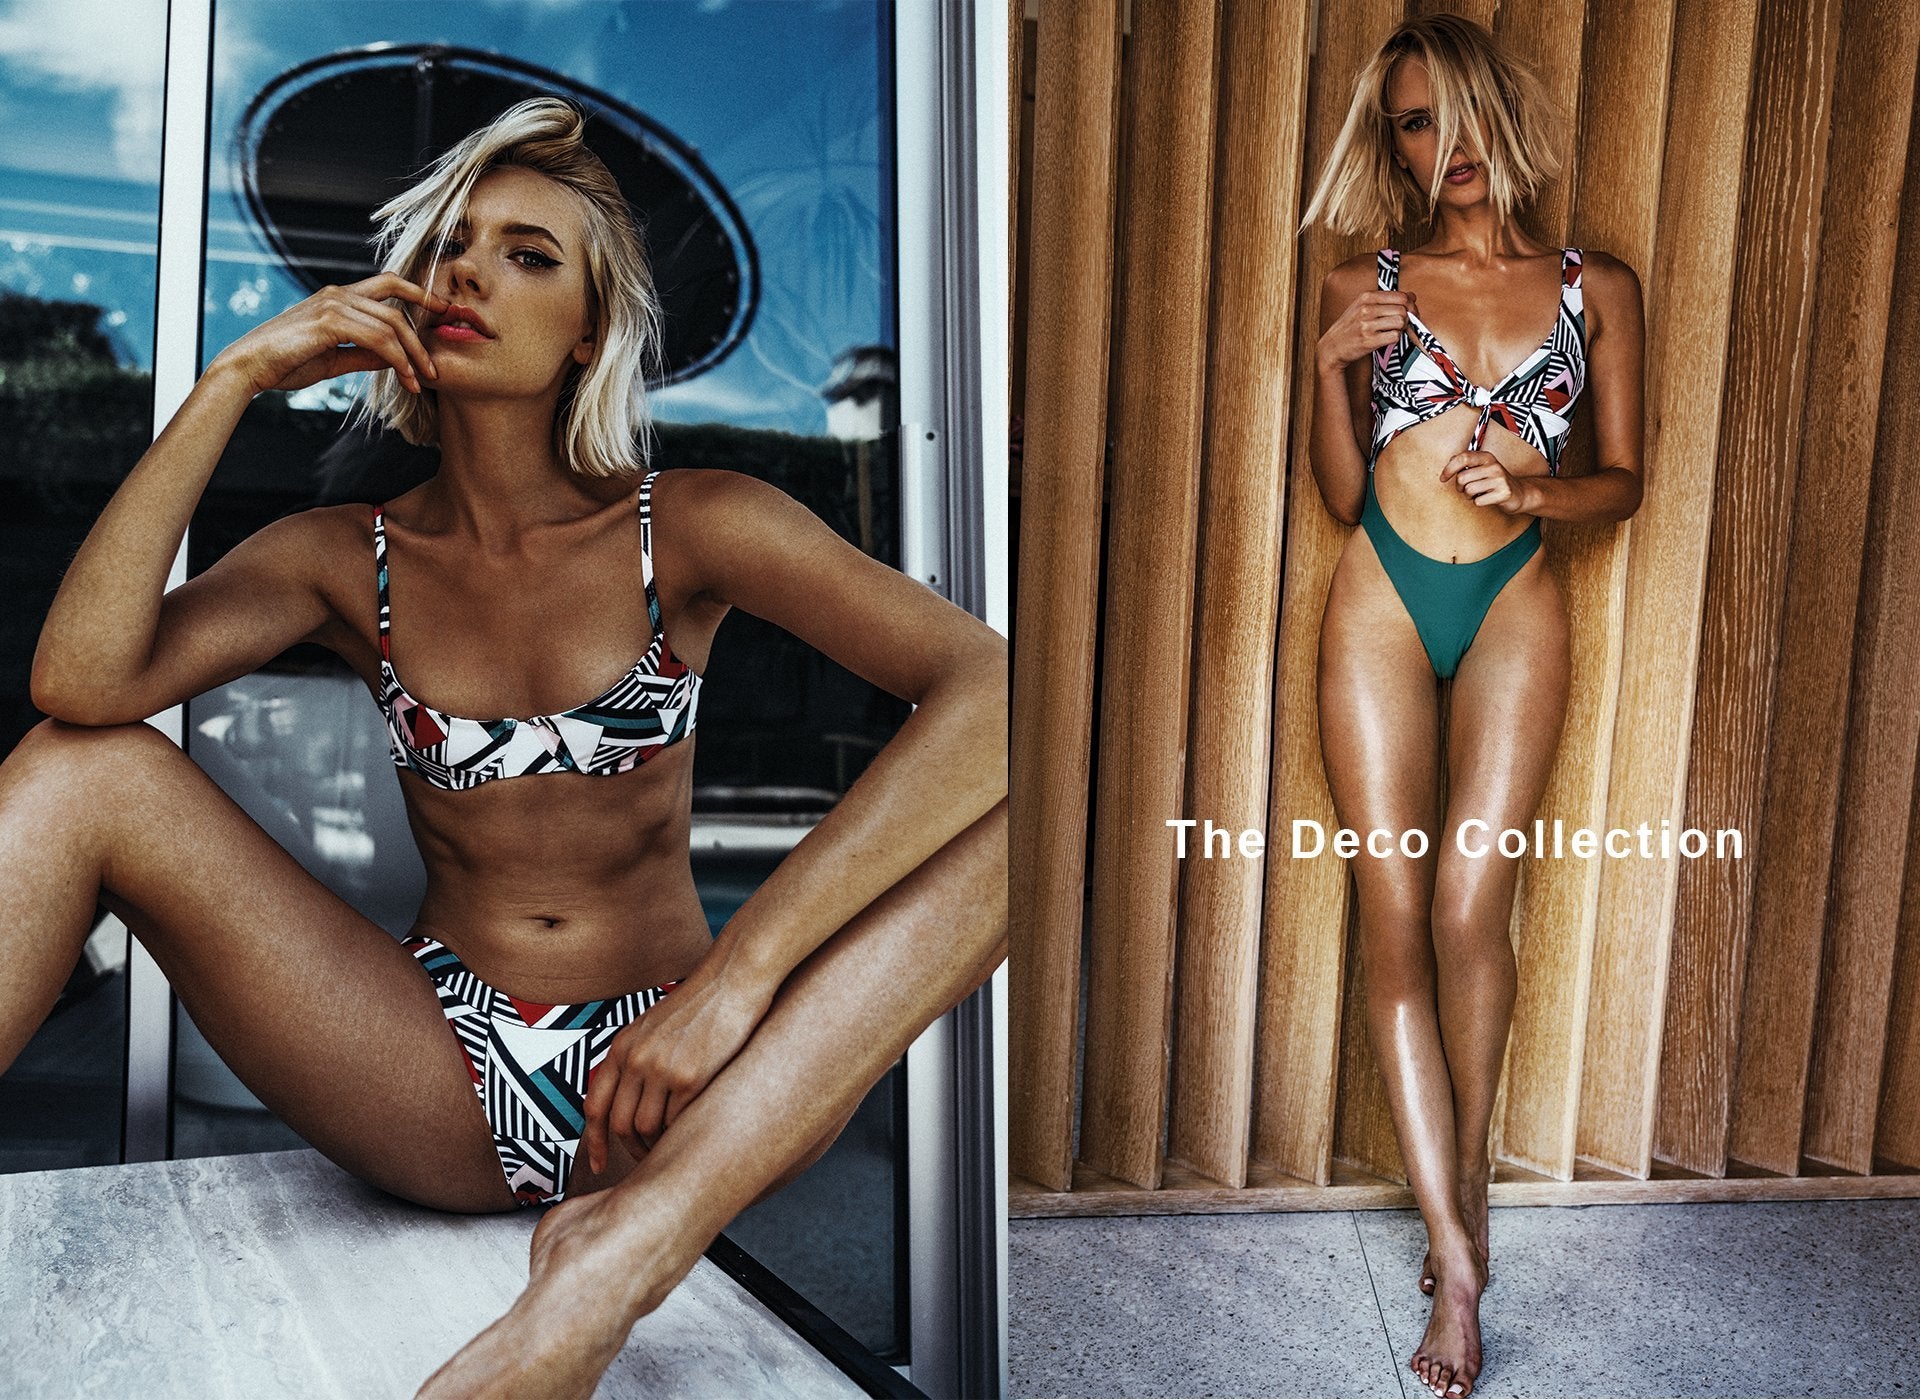 The Deco Collection